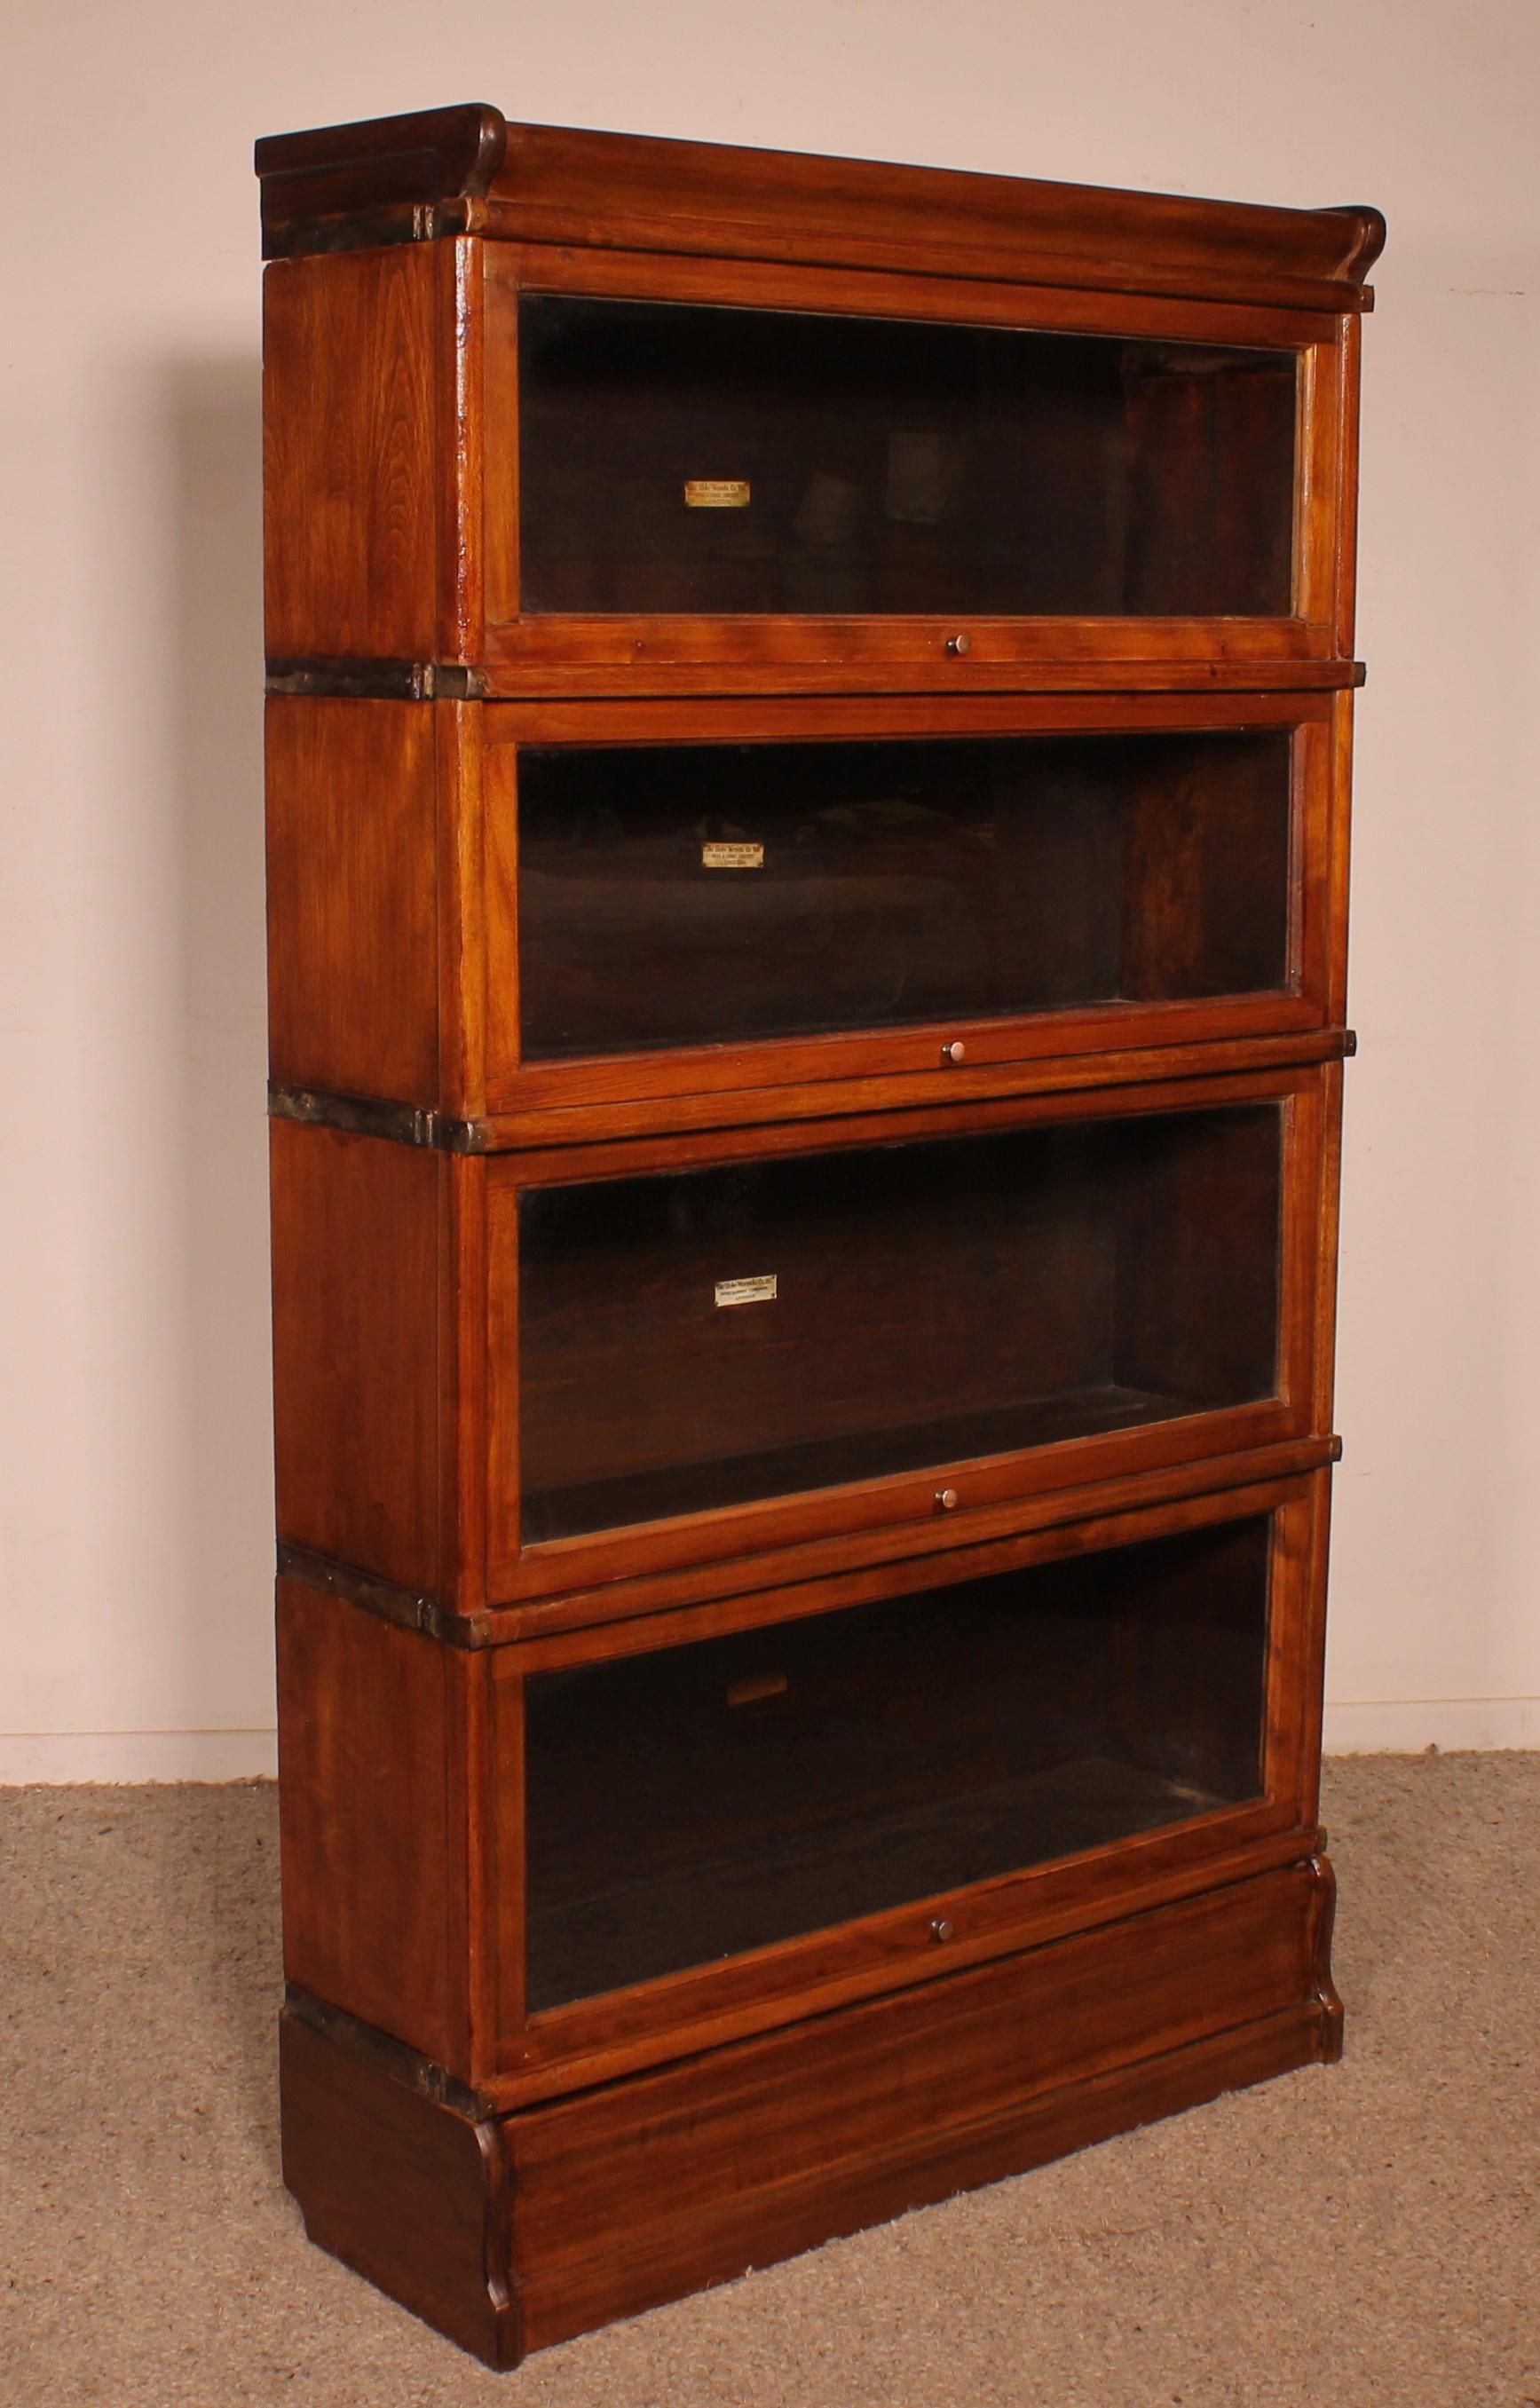 Elegant Globe Wernicke London mahogany bookcase from the end of the 19th century - Early 20th century  from England which has 4 elements

Small model which is composed of a molded base and top and 4 glazed elements

The windows slide inside the